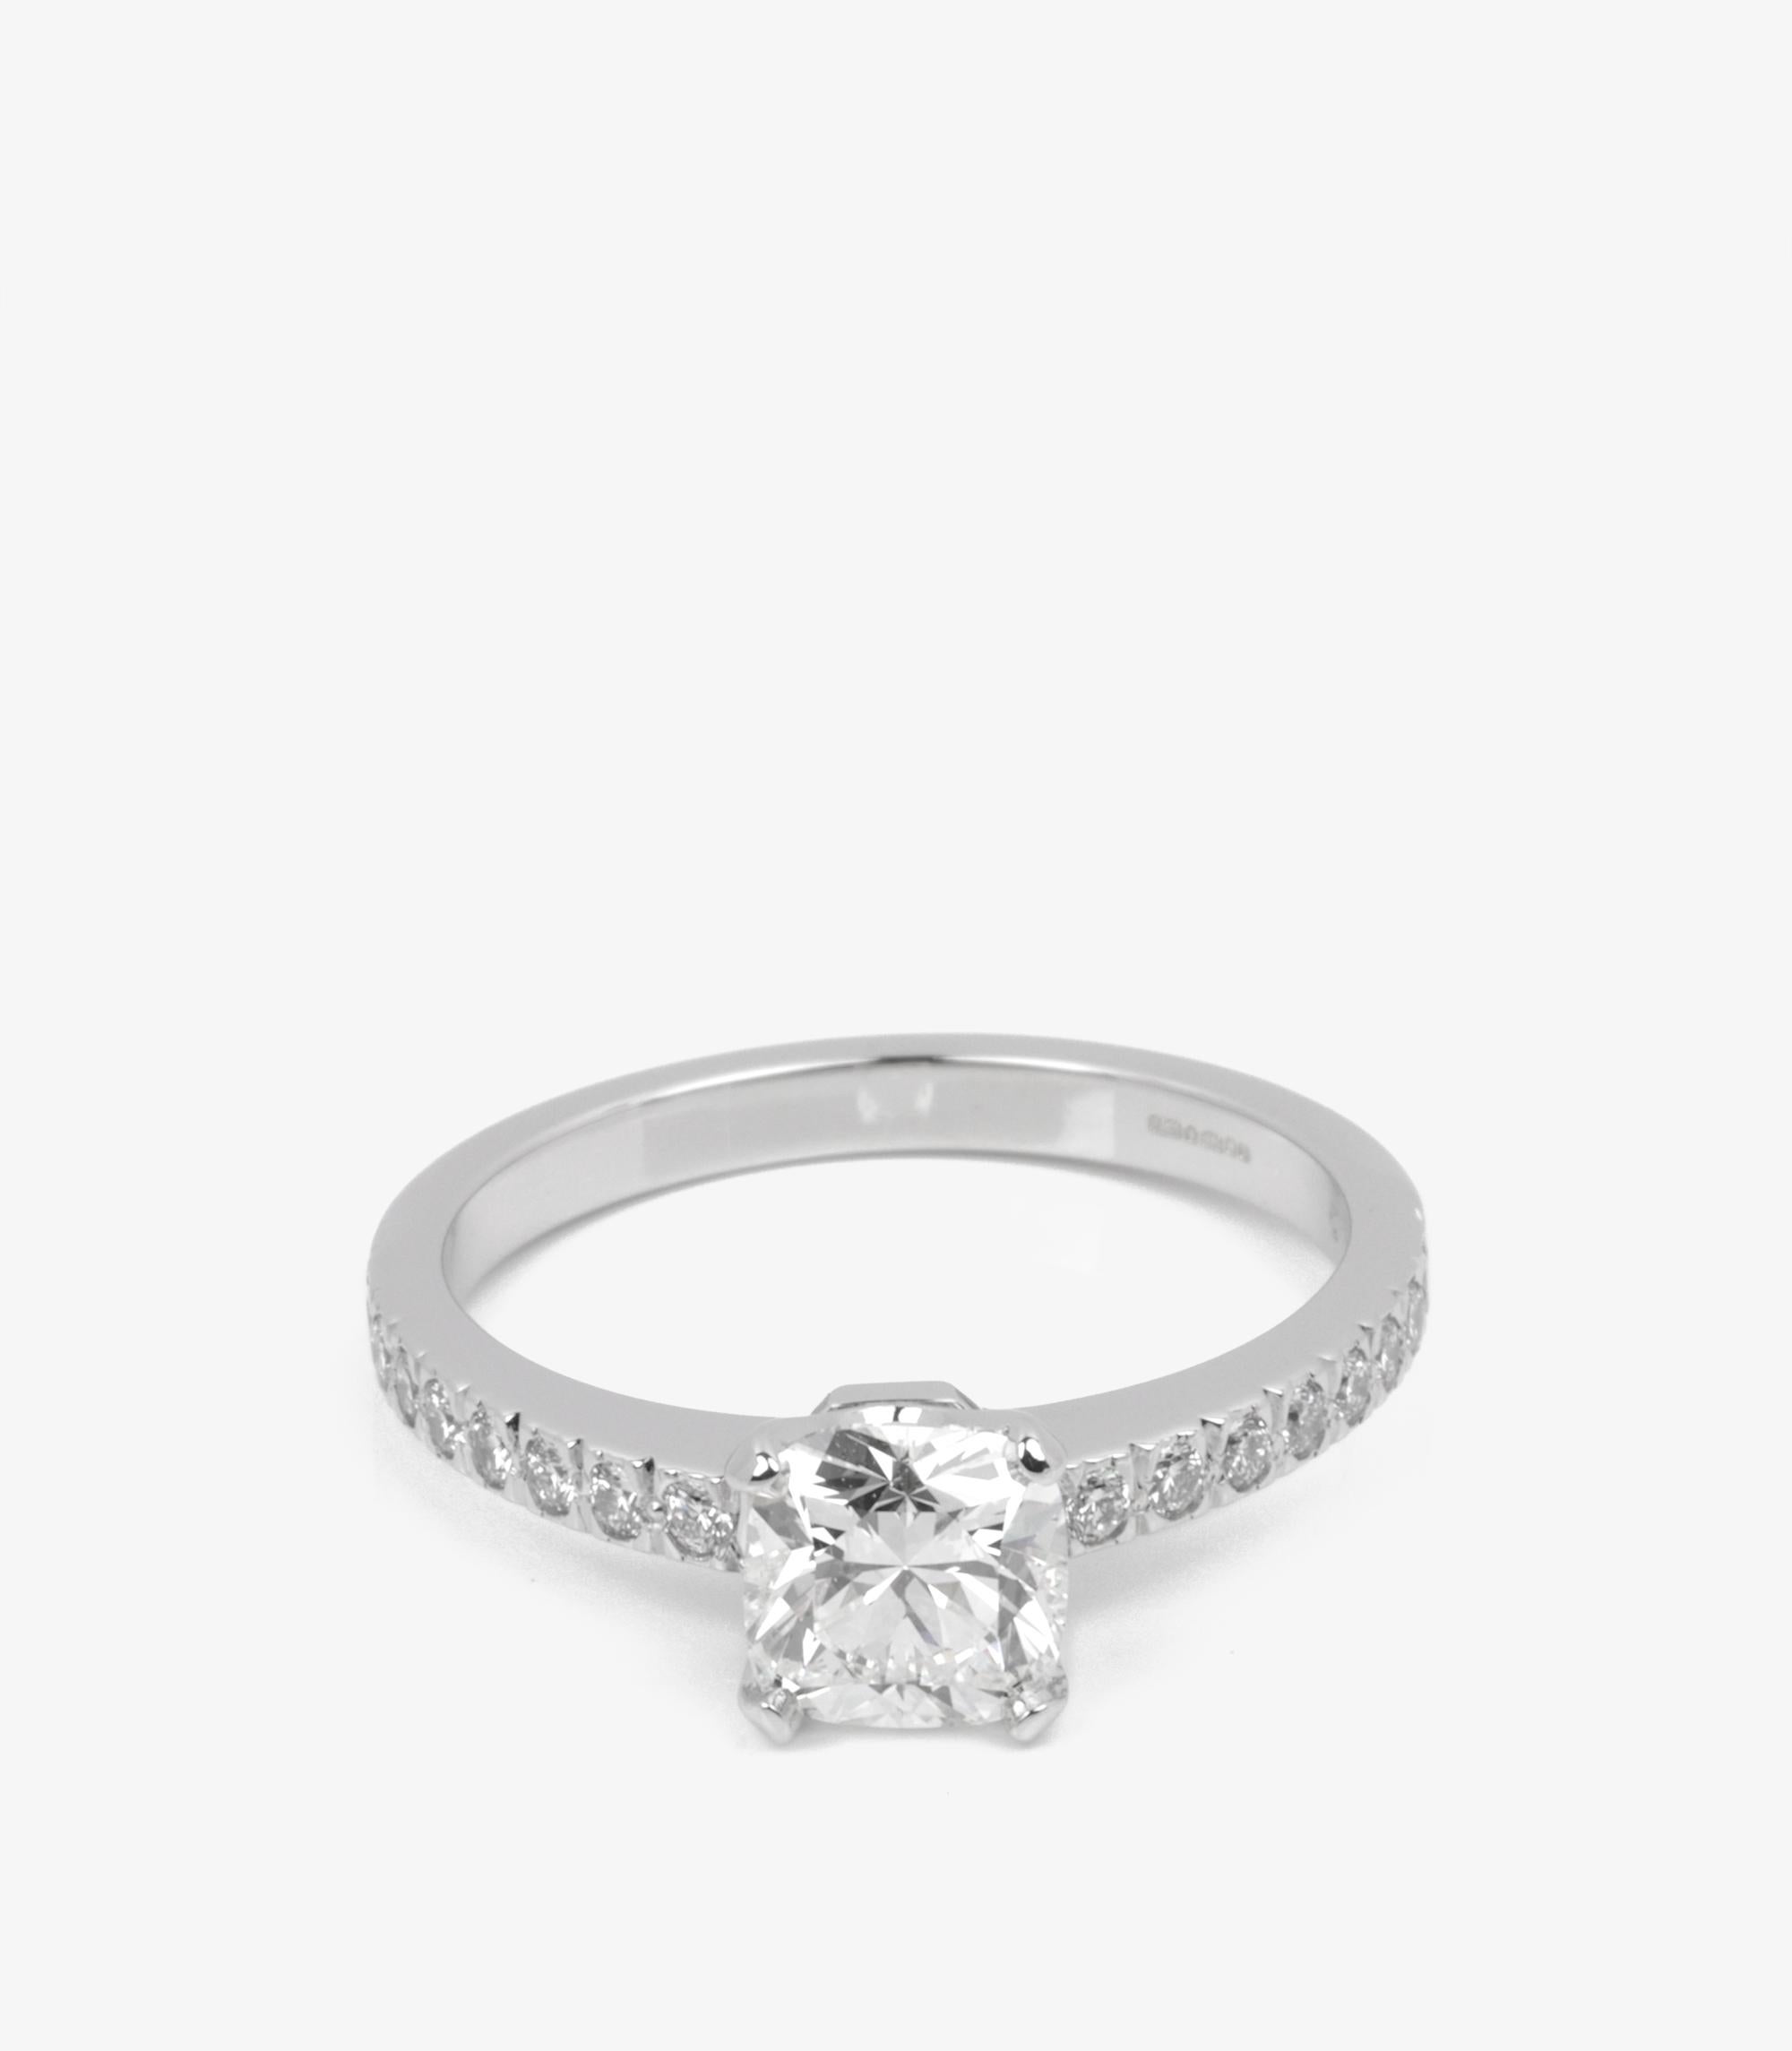 Tiffany & Co. 0.90ct Cushion Cut Diamond Platinum Novo Ring In Excellent Condition For Sale In Bishop's Stortford, Hertfordshire